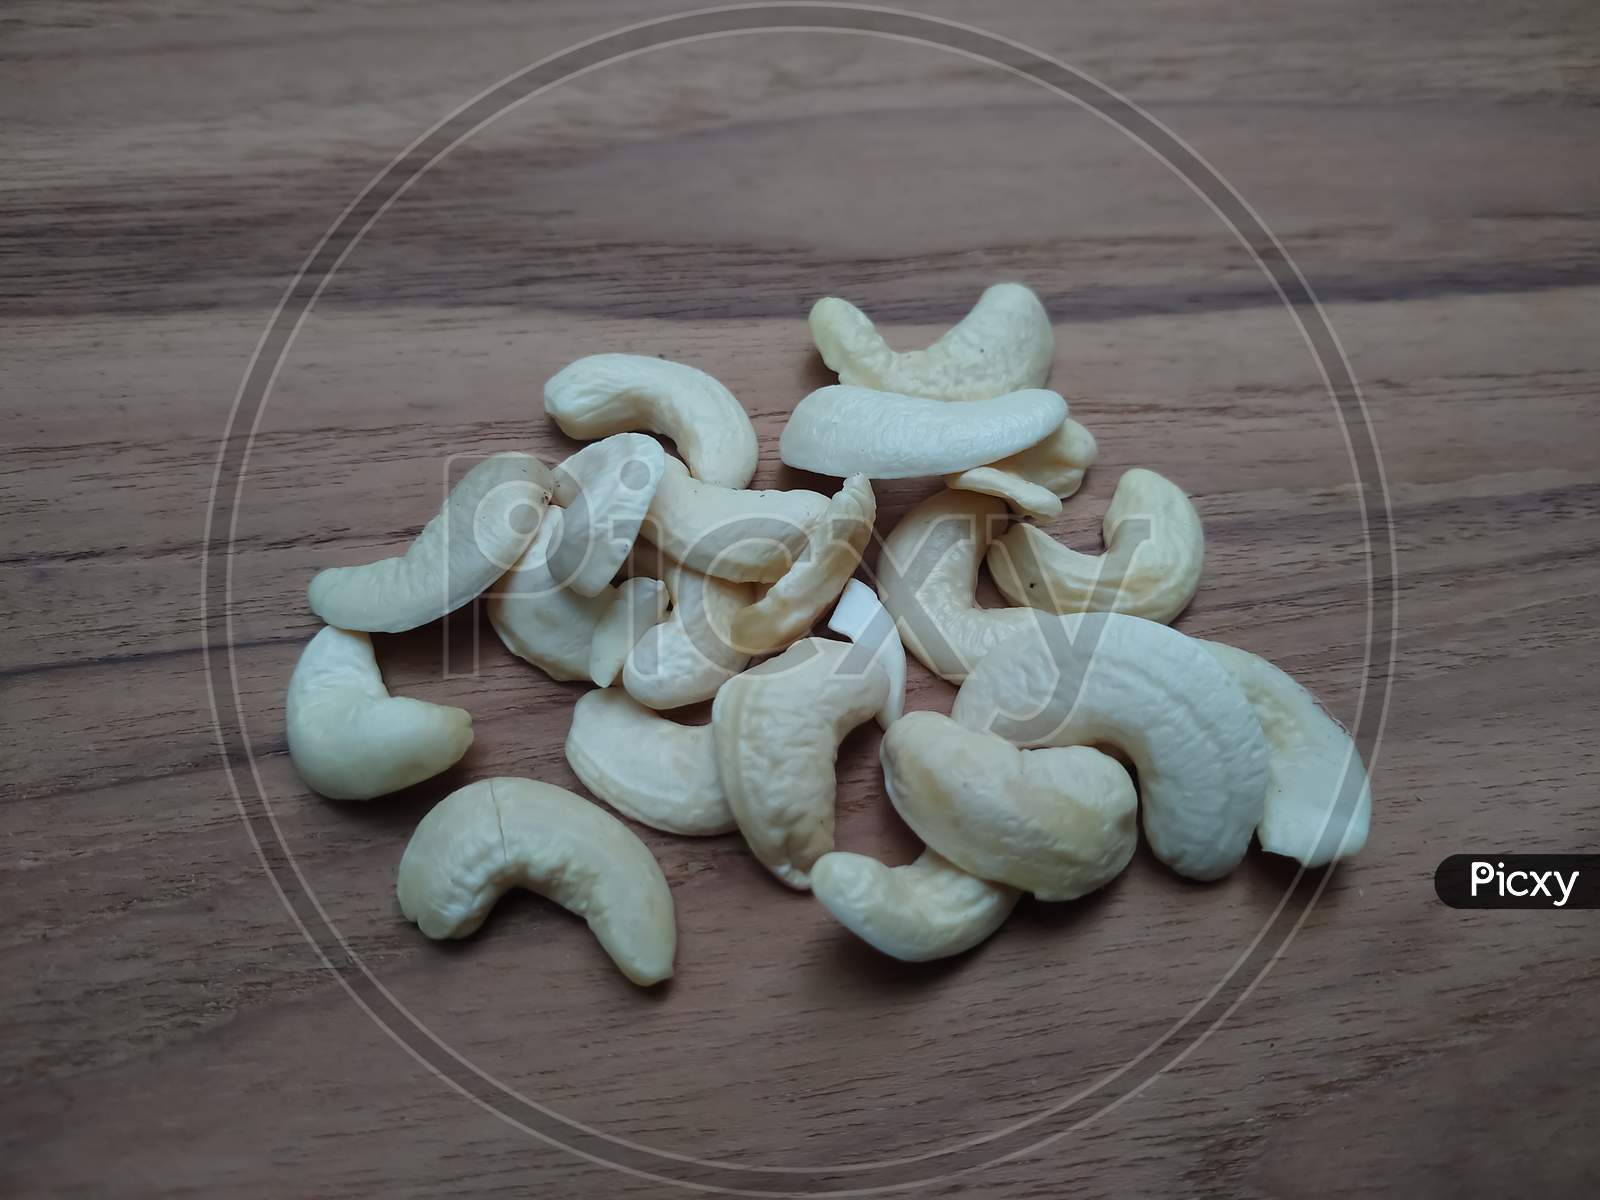 Cashew nuts on wooden background